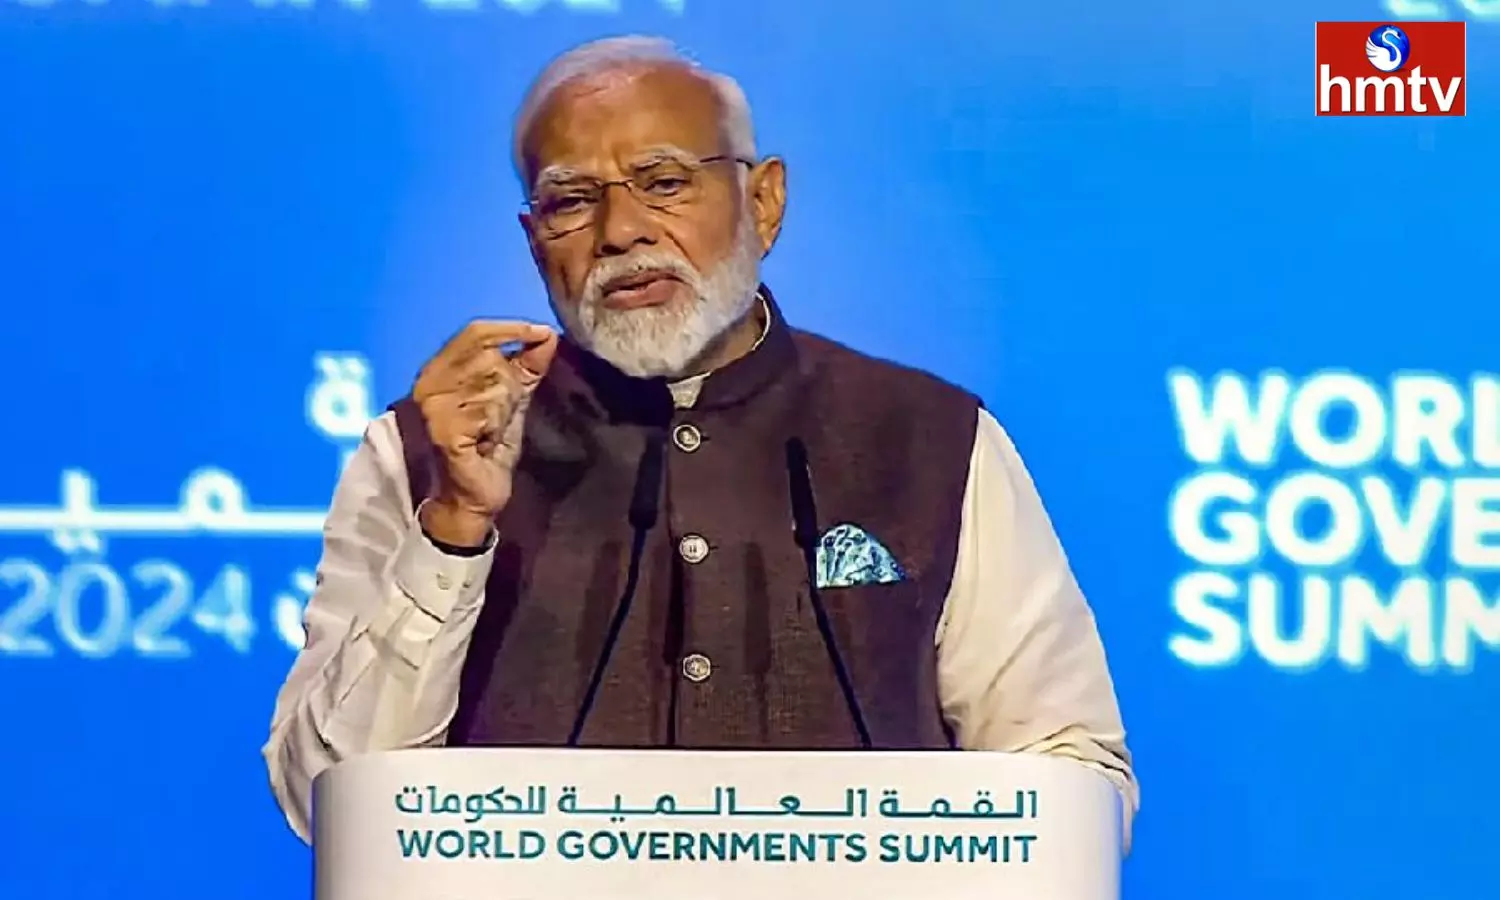 Technology-Driven Smart Governments Are Required Says Narendra Modi